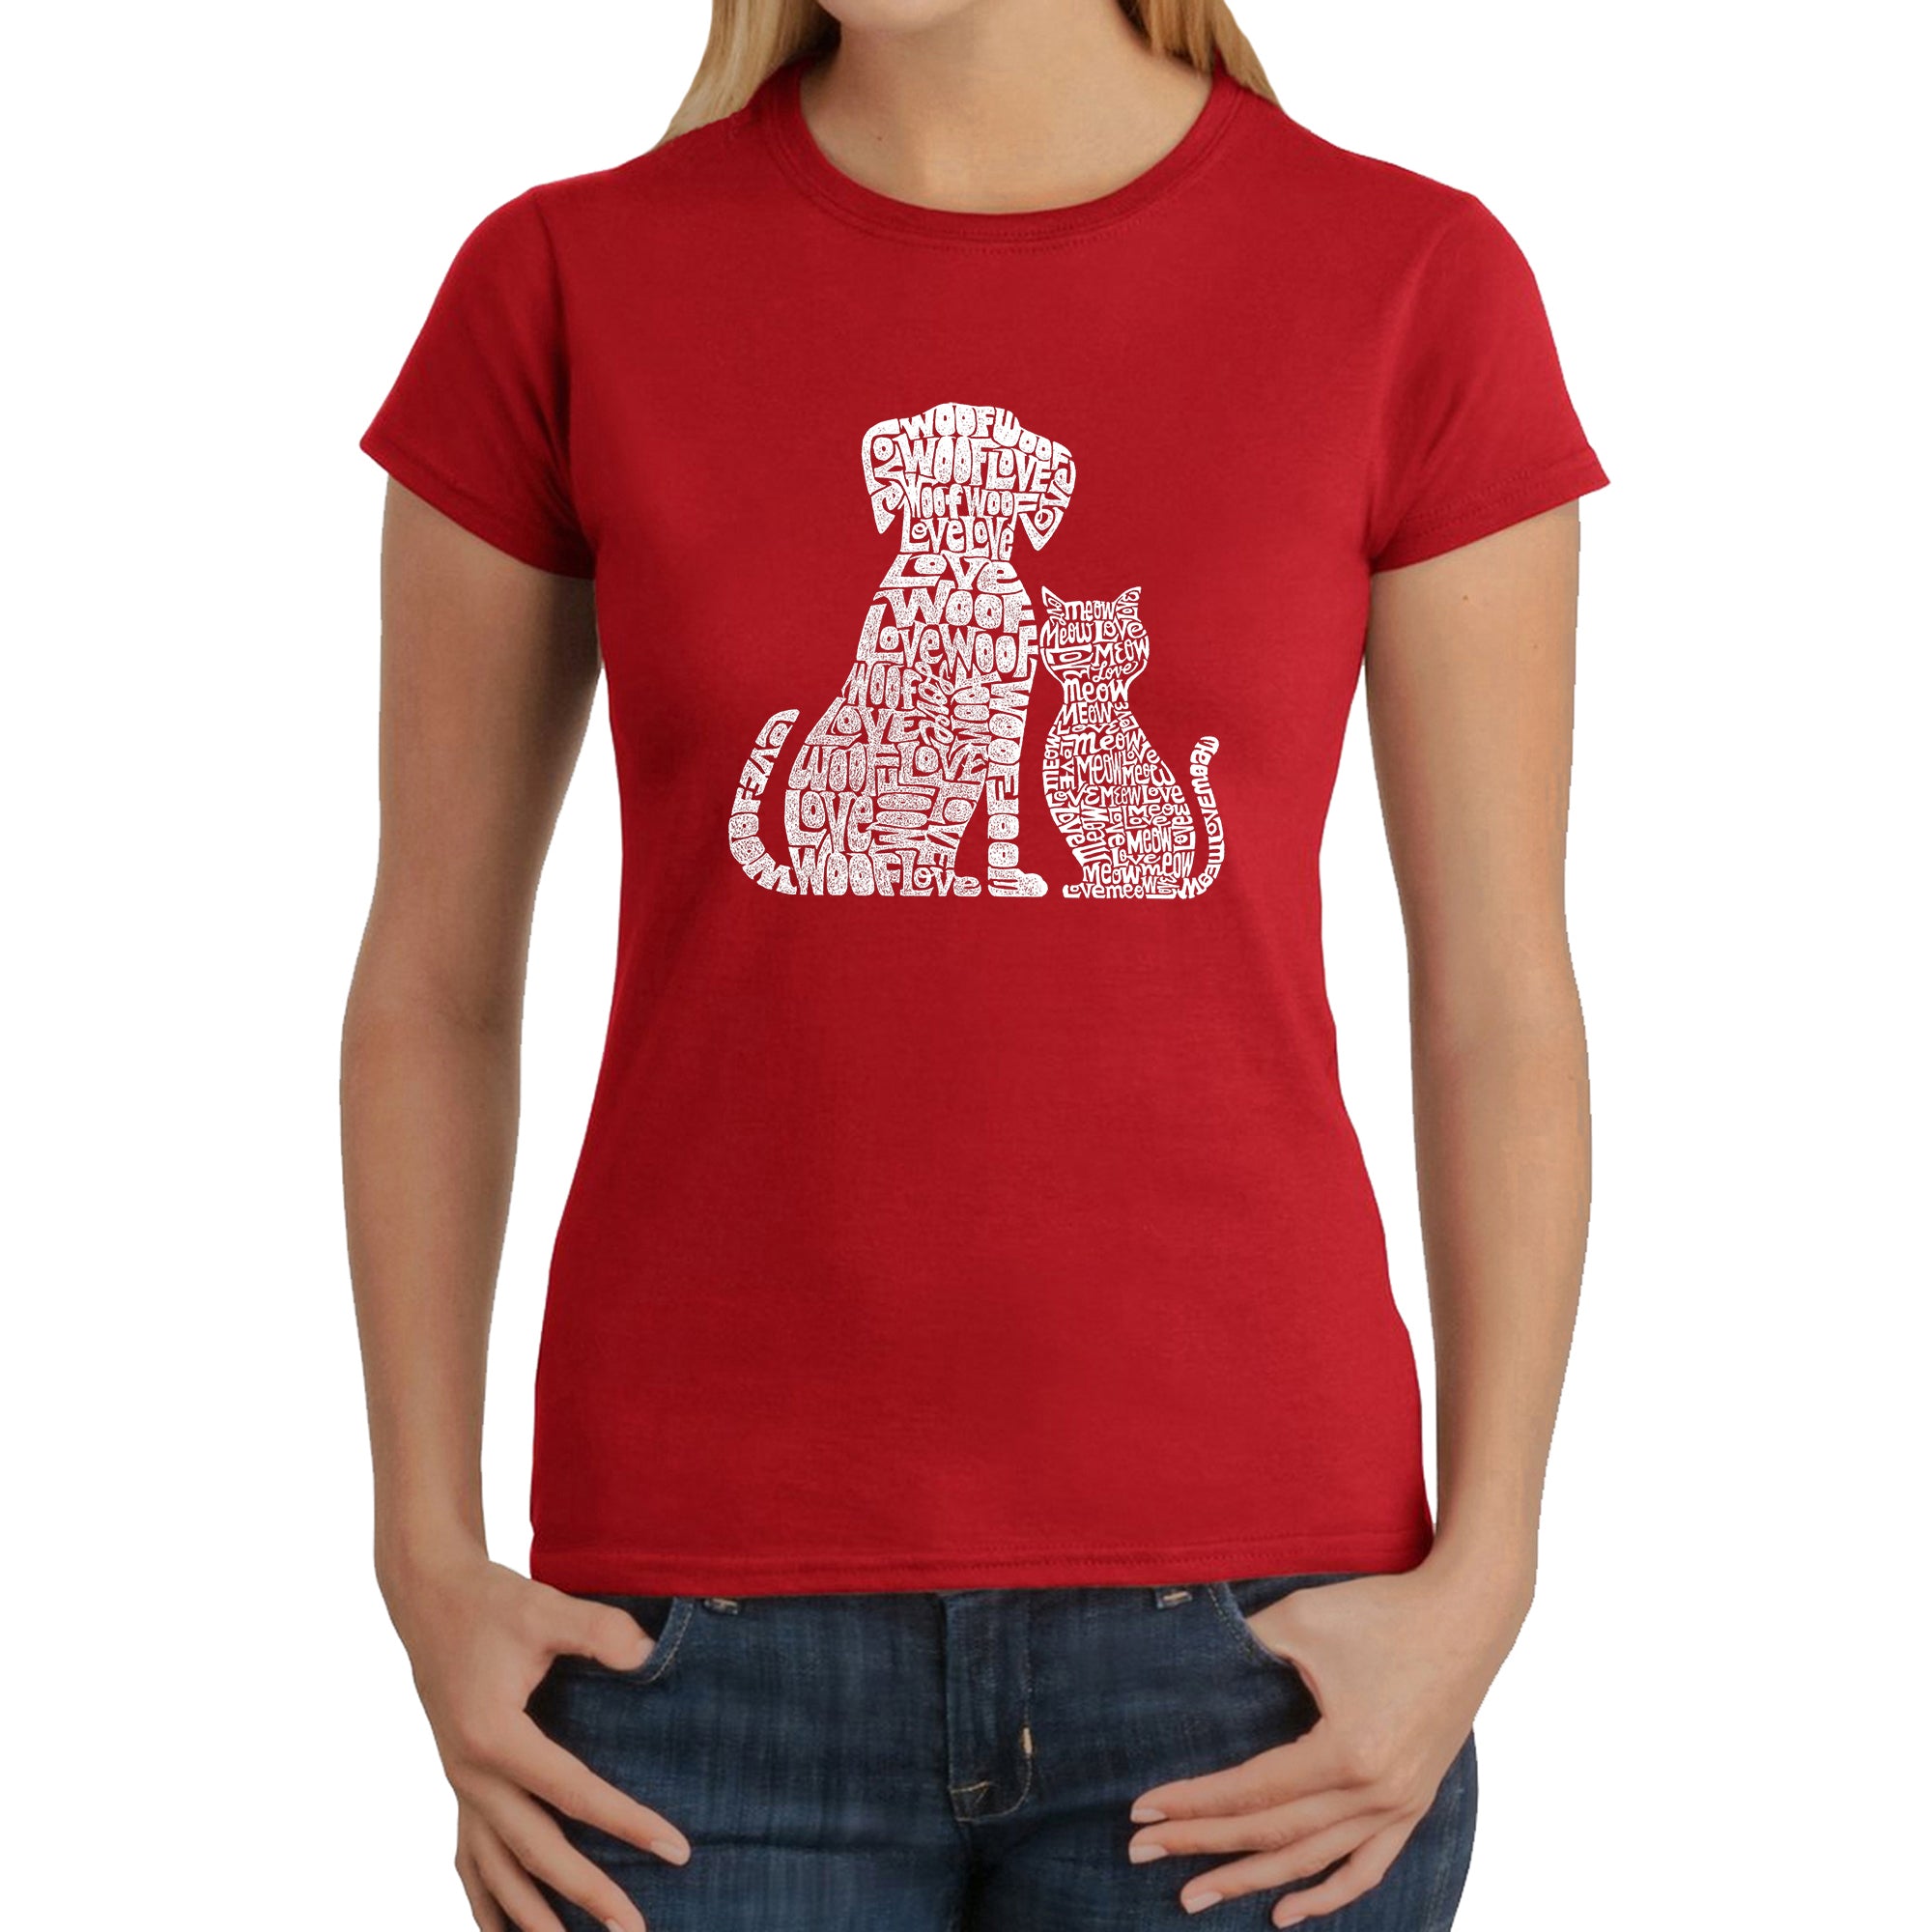 Dogs And Cats - Women's Word Art T-Shirt - Red - X-Large